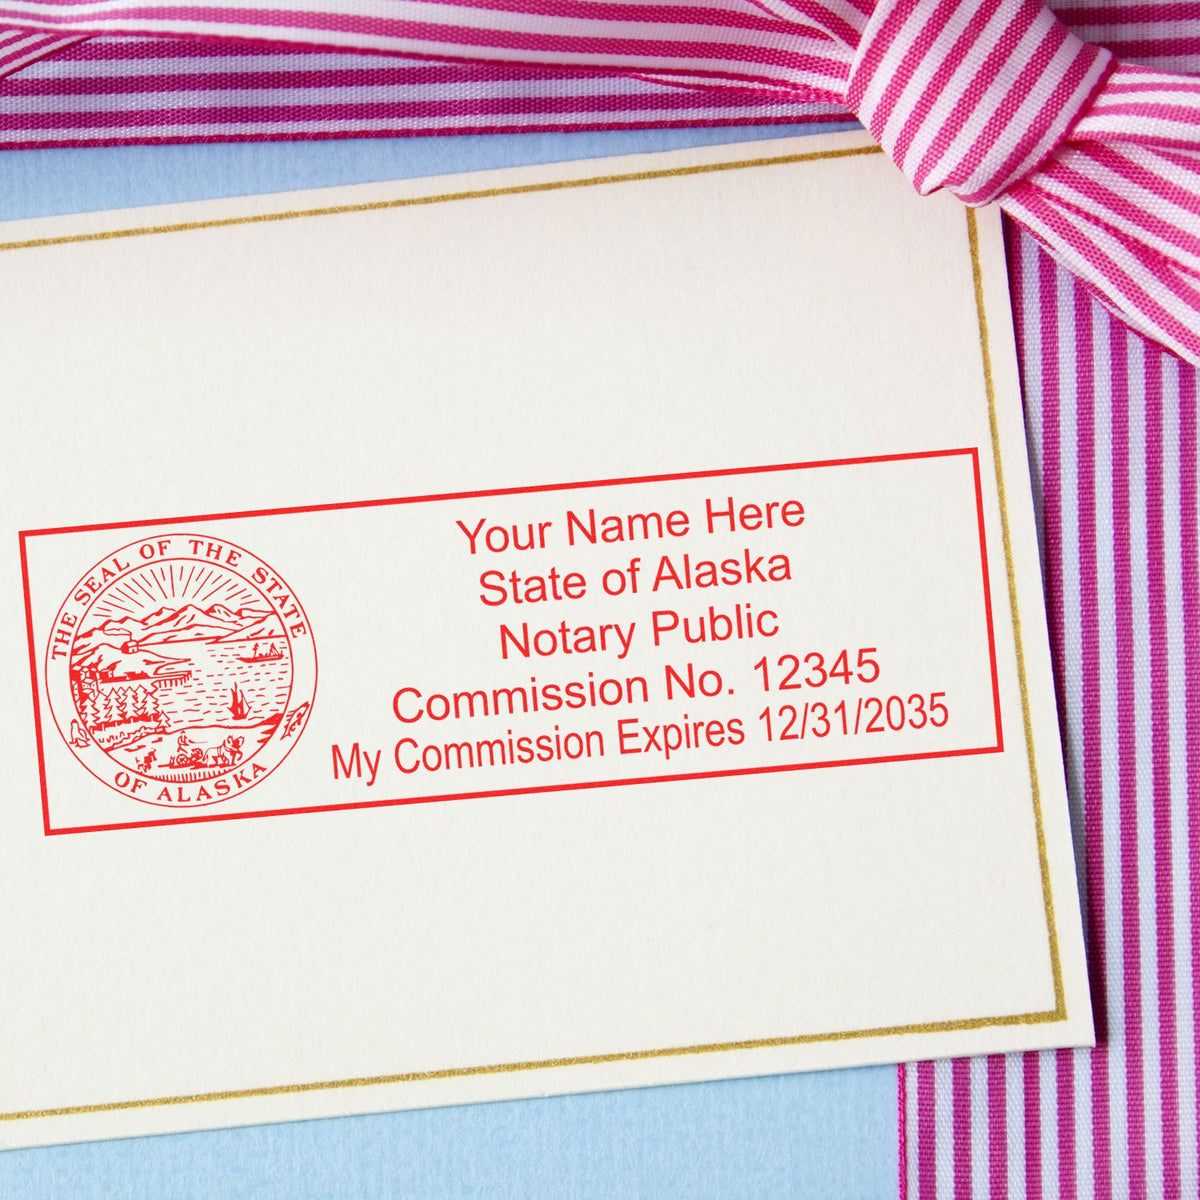 The Heavy-Duty Alaska Rectangular Notary Stamp stamp impression comes to life with a crisp, detailed photo on paper - showcasing true professional quality.